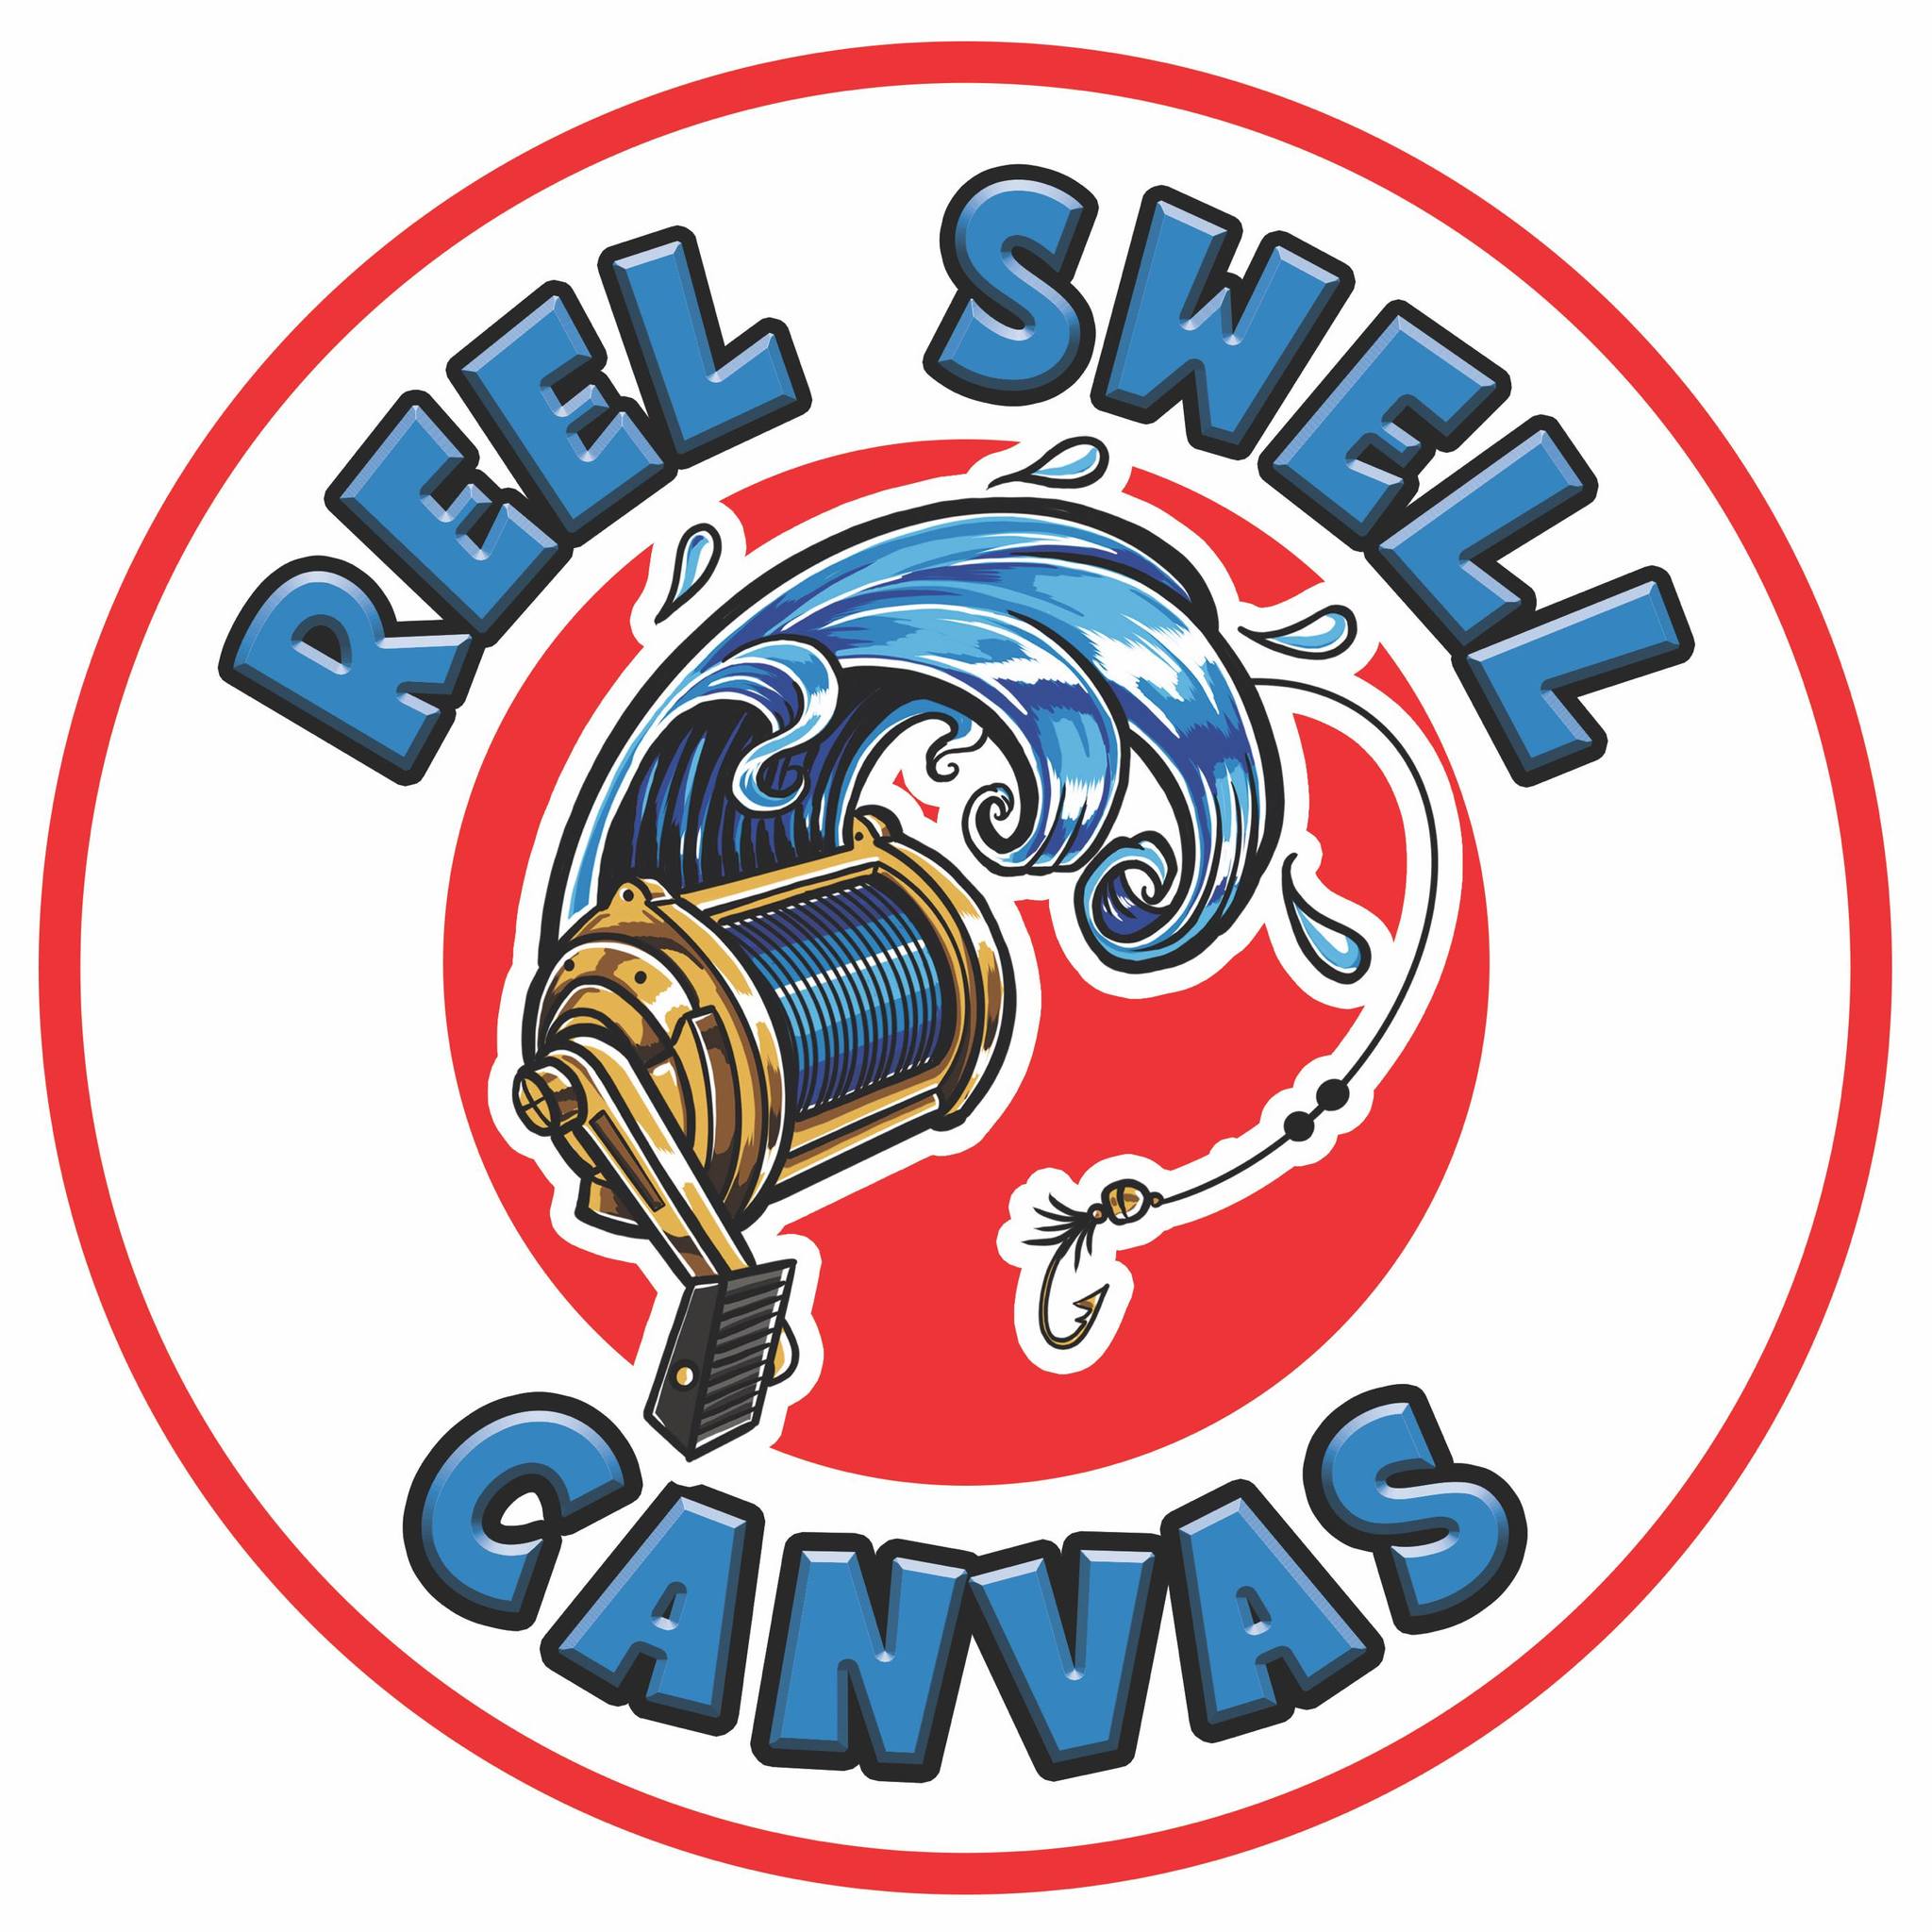 Reel Swell Canvas